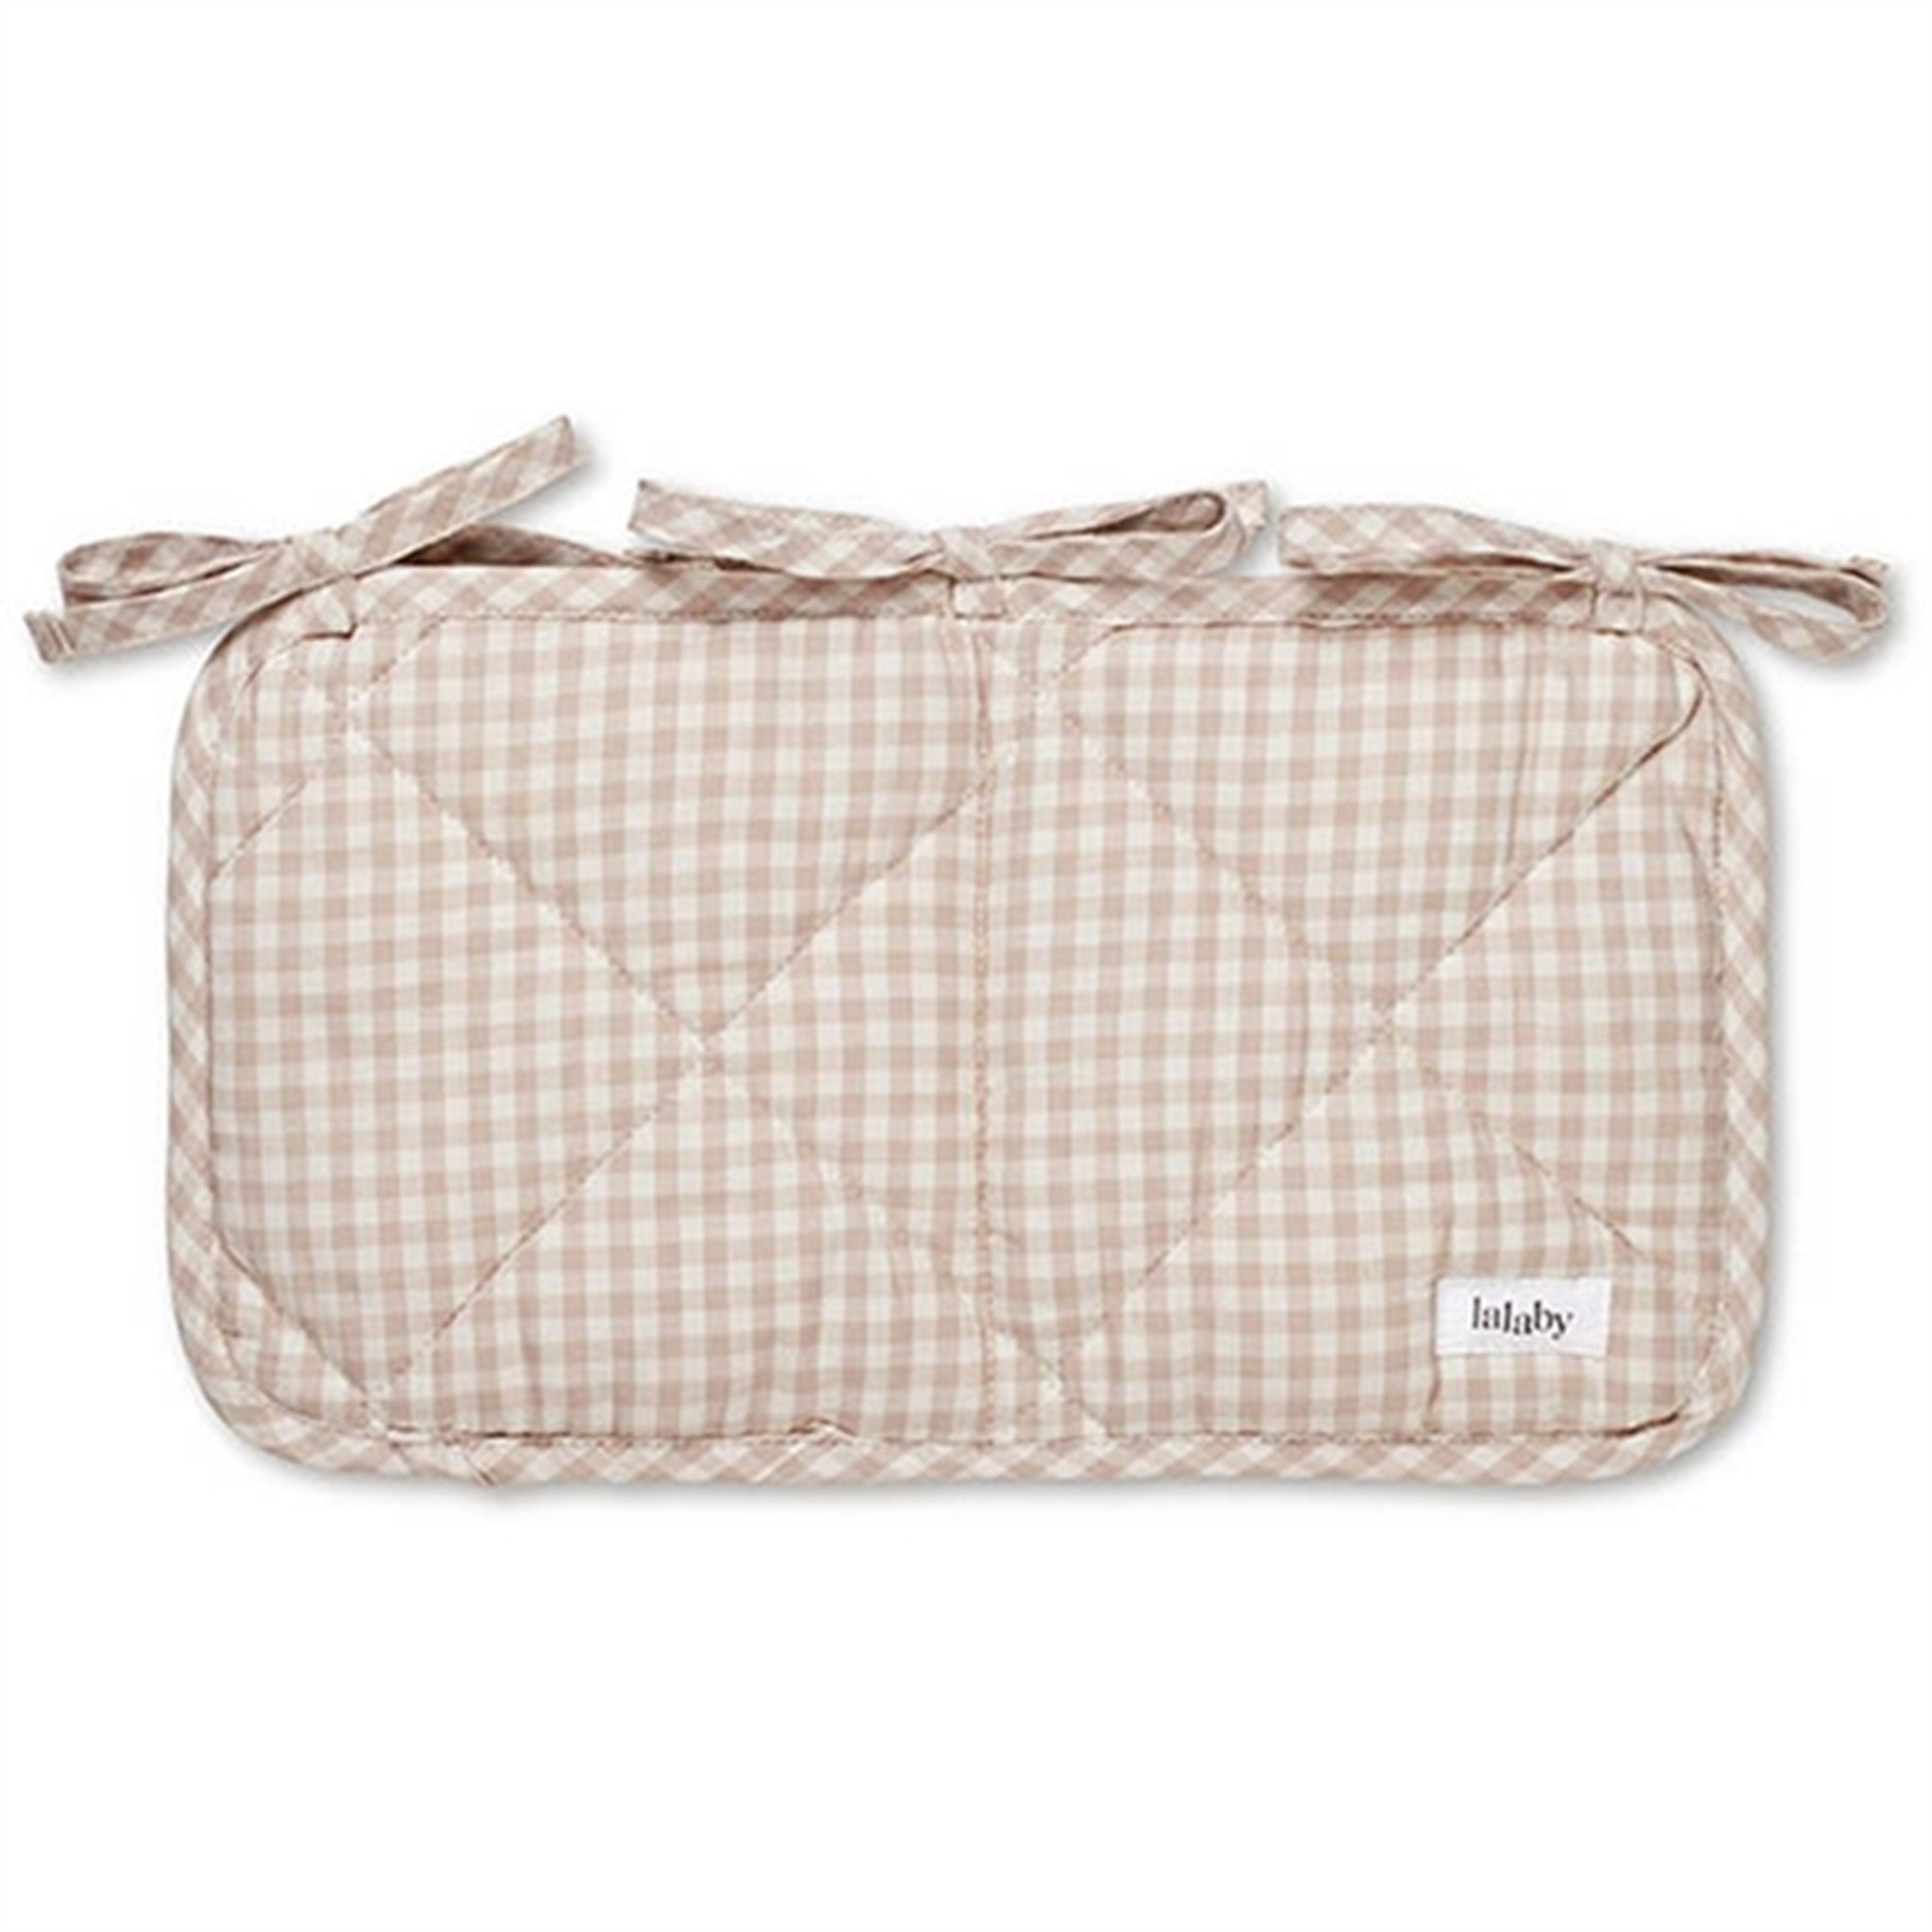 Lalaby Sengelomme Beige Gingham